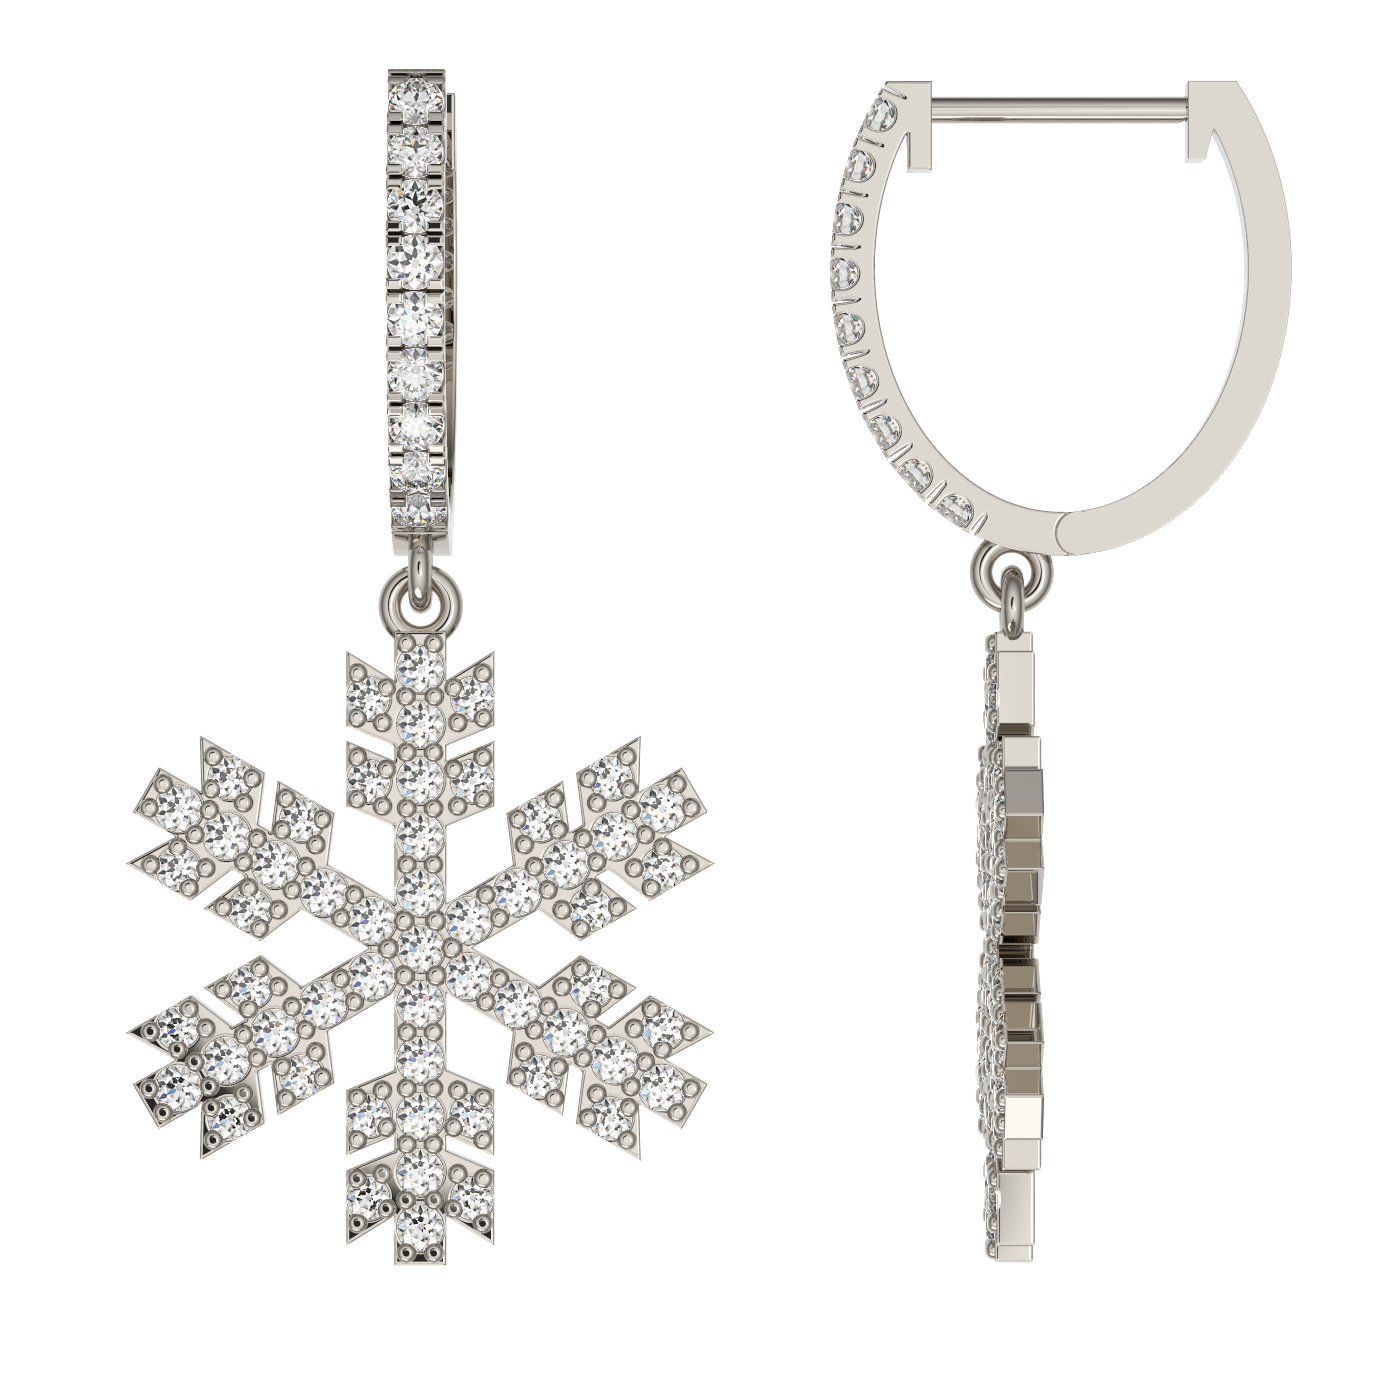 Image of ID 1 Natural 10 CT Diamond Snowflake Earrings in 14K White Gold Christmas Gift Jewelry